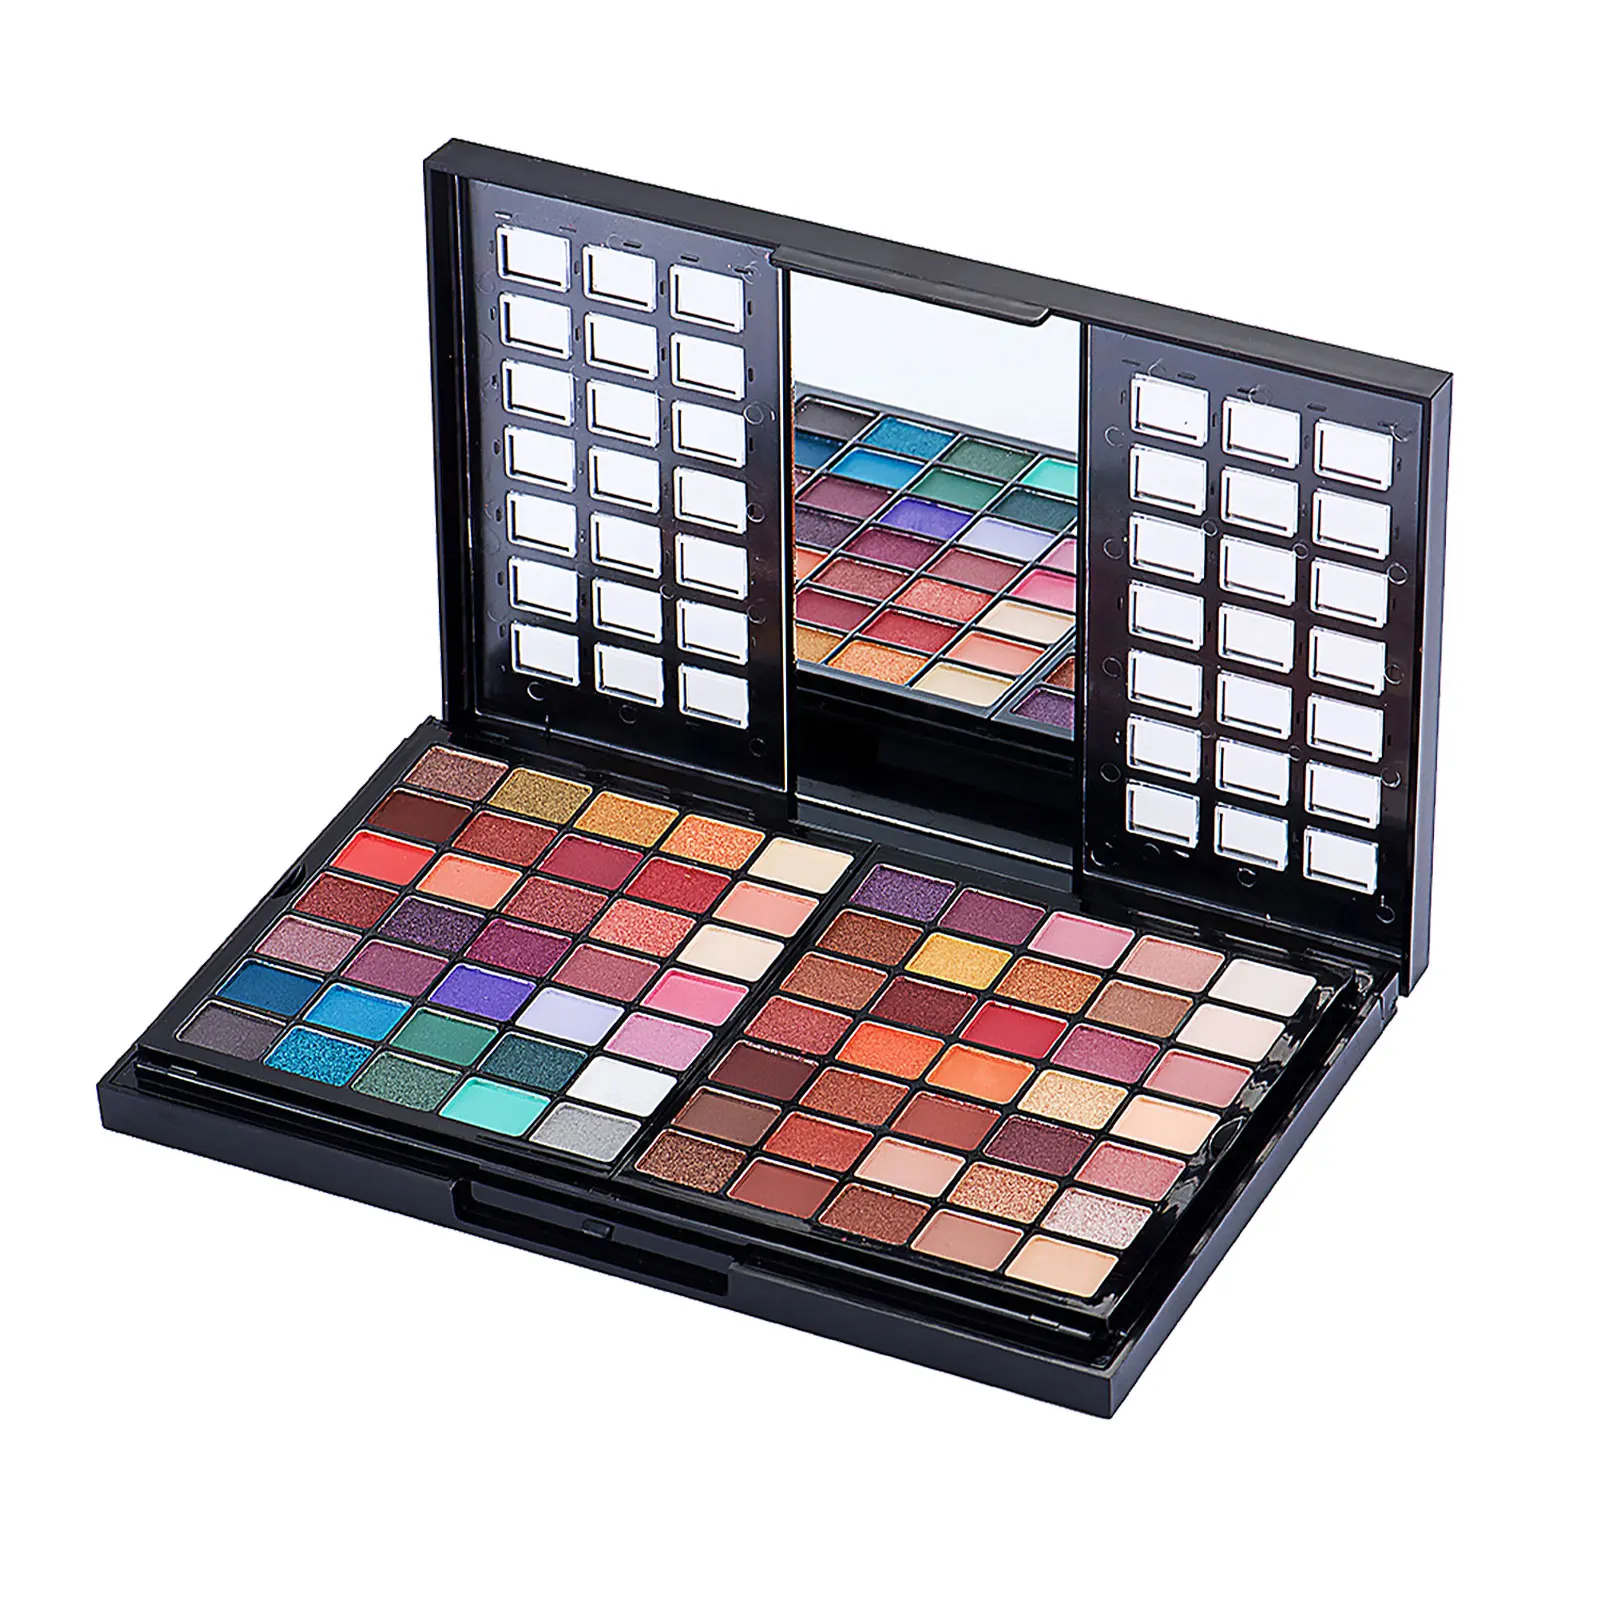 

Makeup Set Professional 88 Colors Eyeshadow Palette All In One Makeup Gift Set With Lip Gloss Eye Shadow Blush Puff Brush And